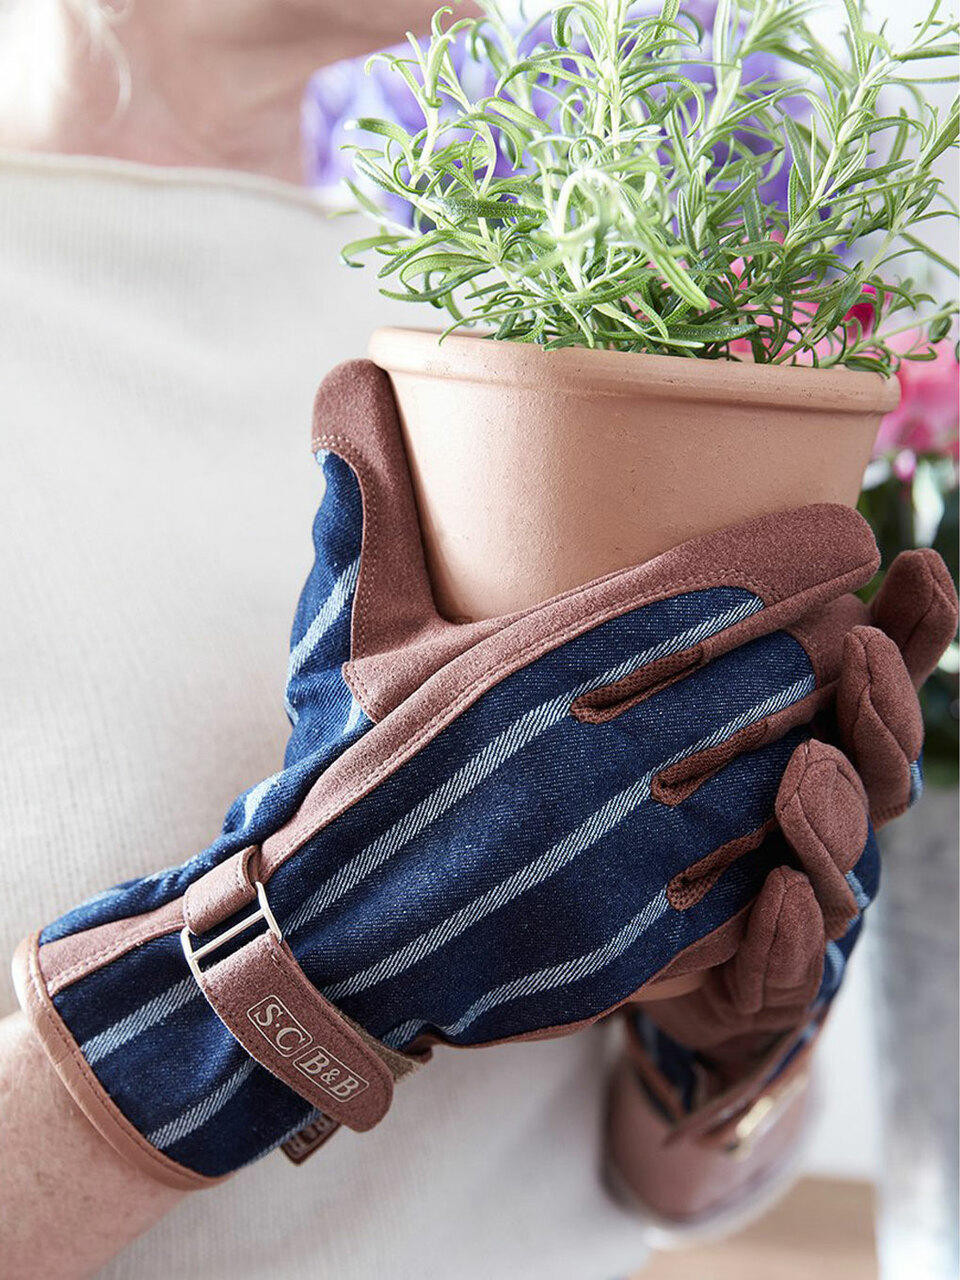 Burgon and Ball Sophie Conran Everyday Gloves - Ticking Navy